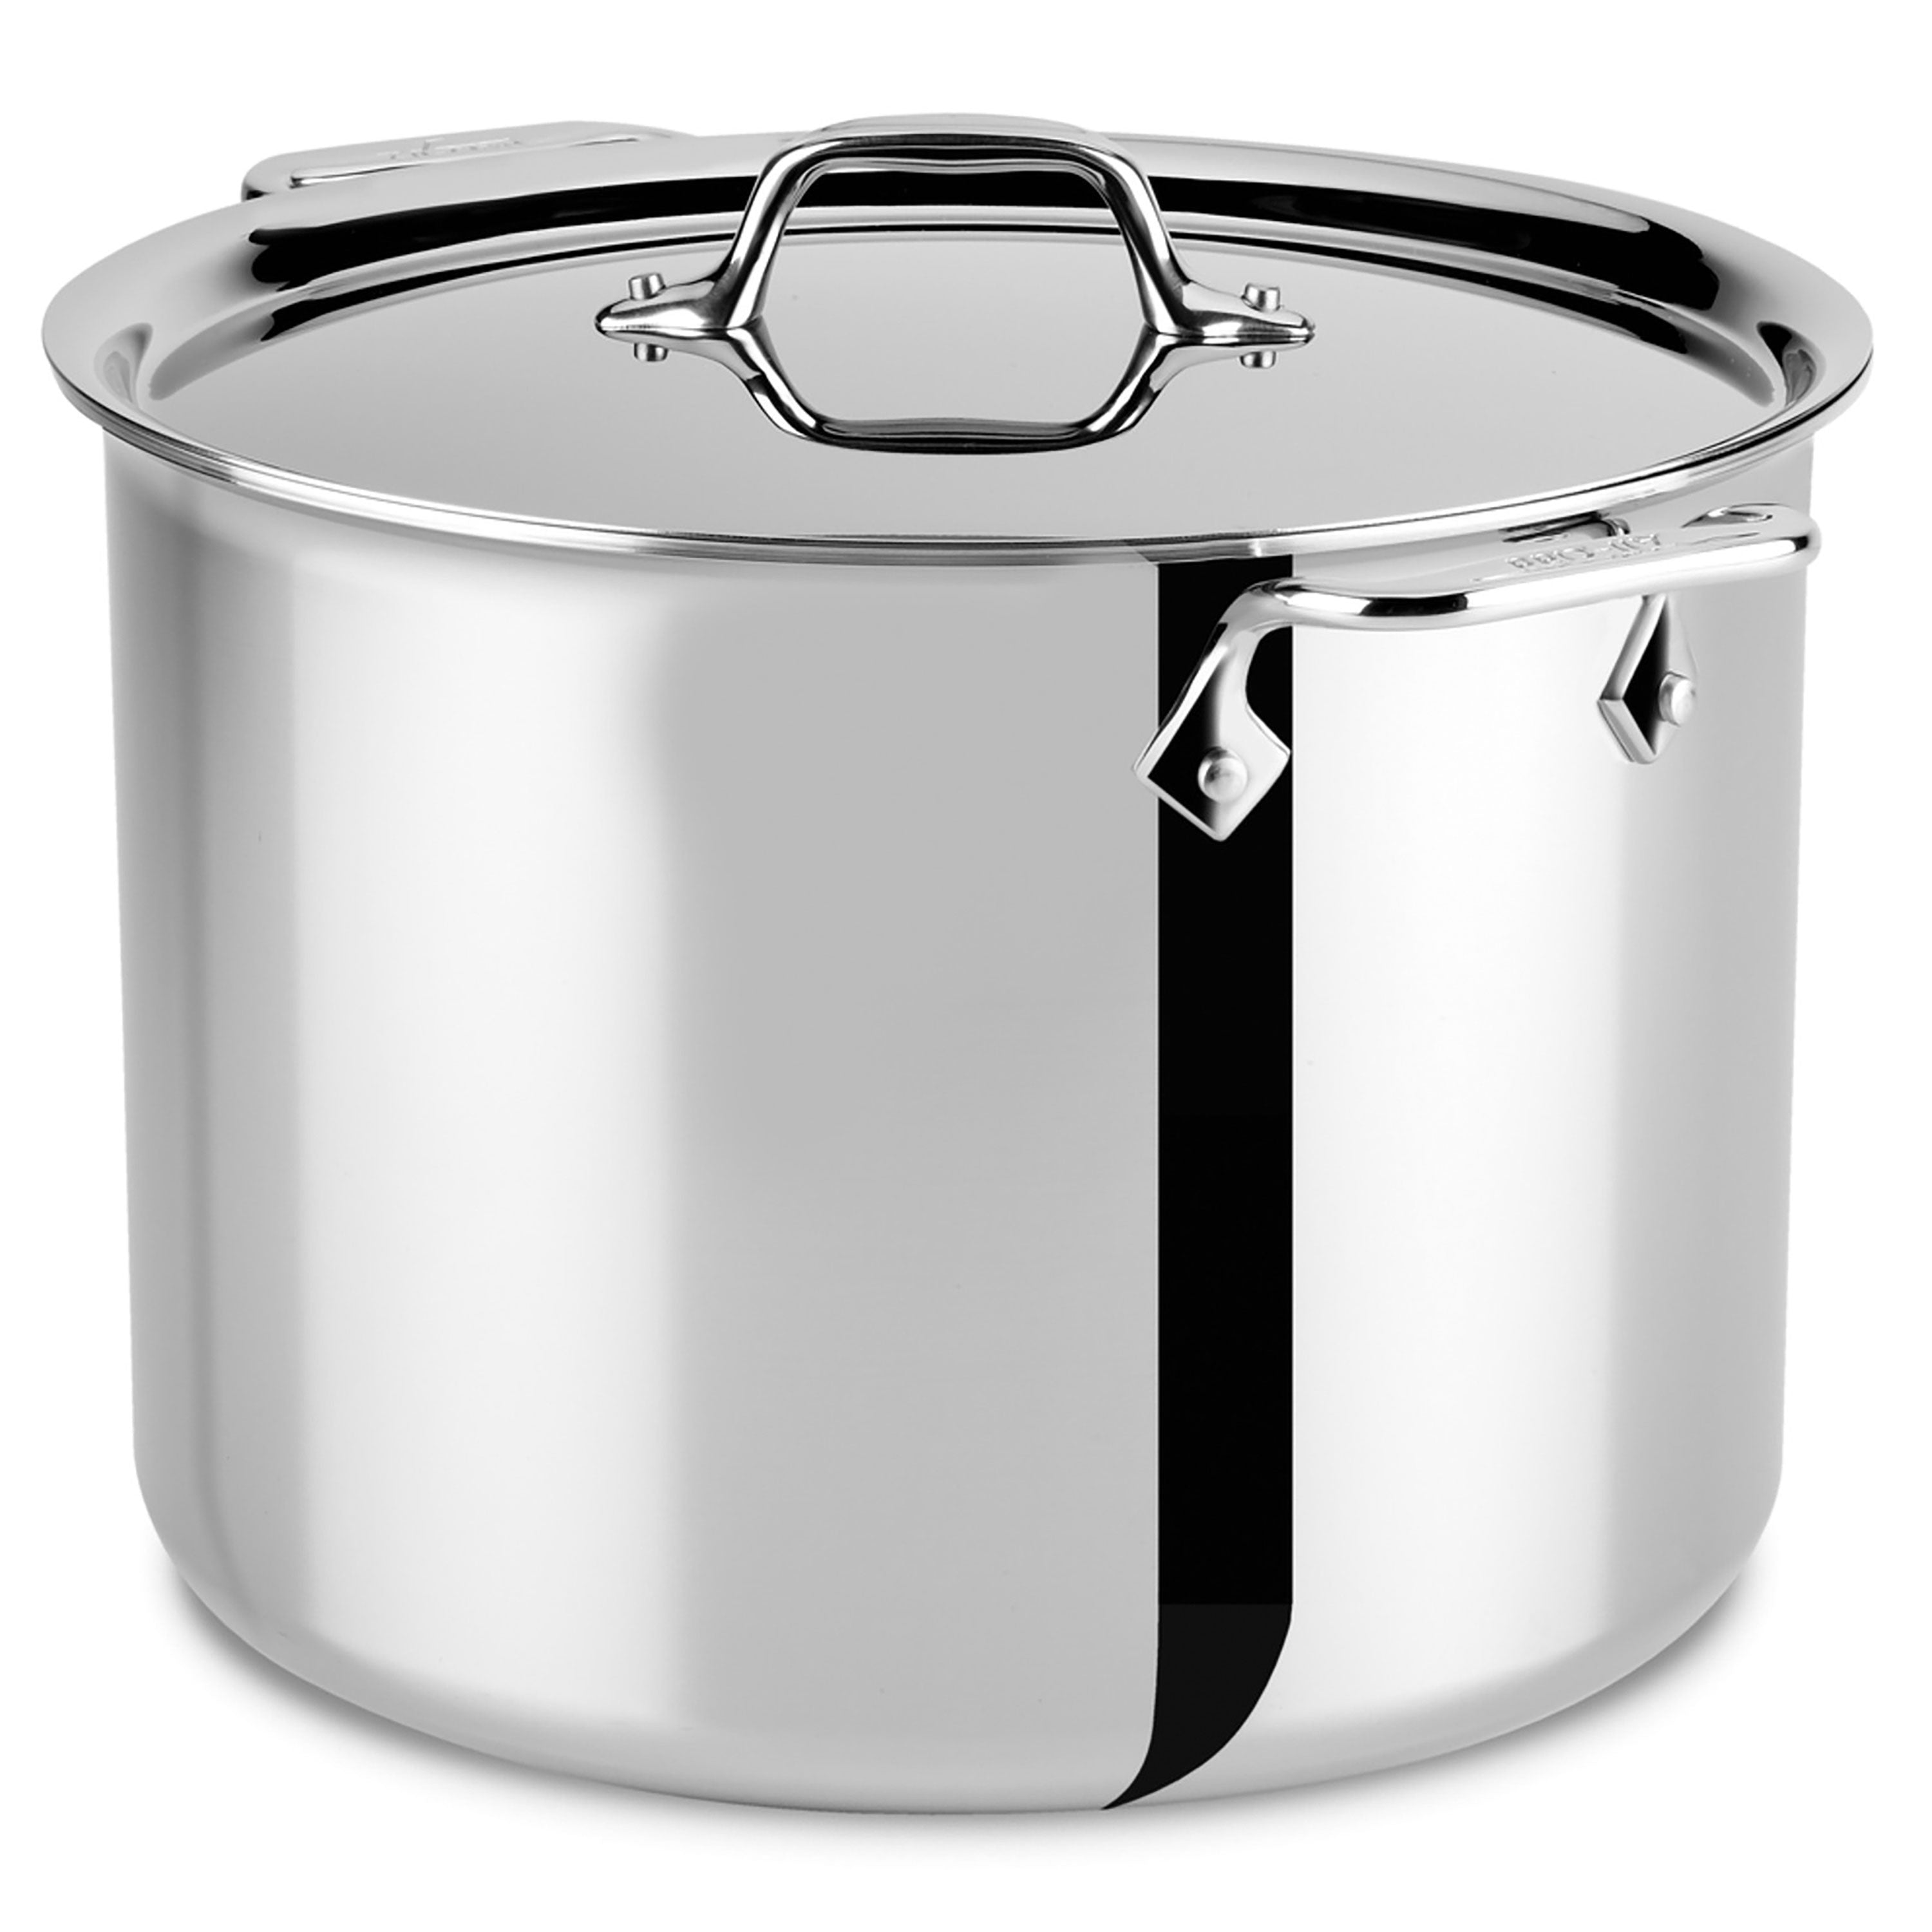 All-Clad D3 Stainless Steel Multi-Pot